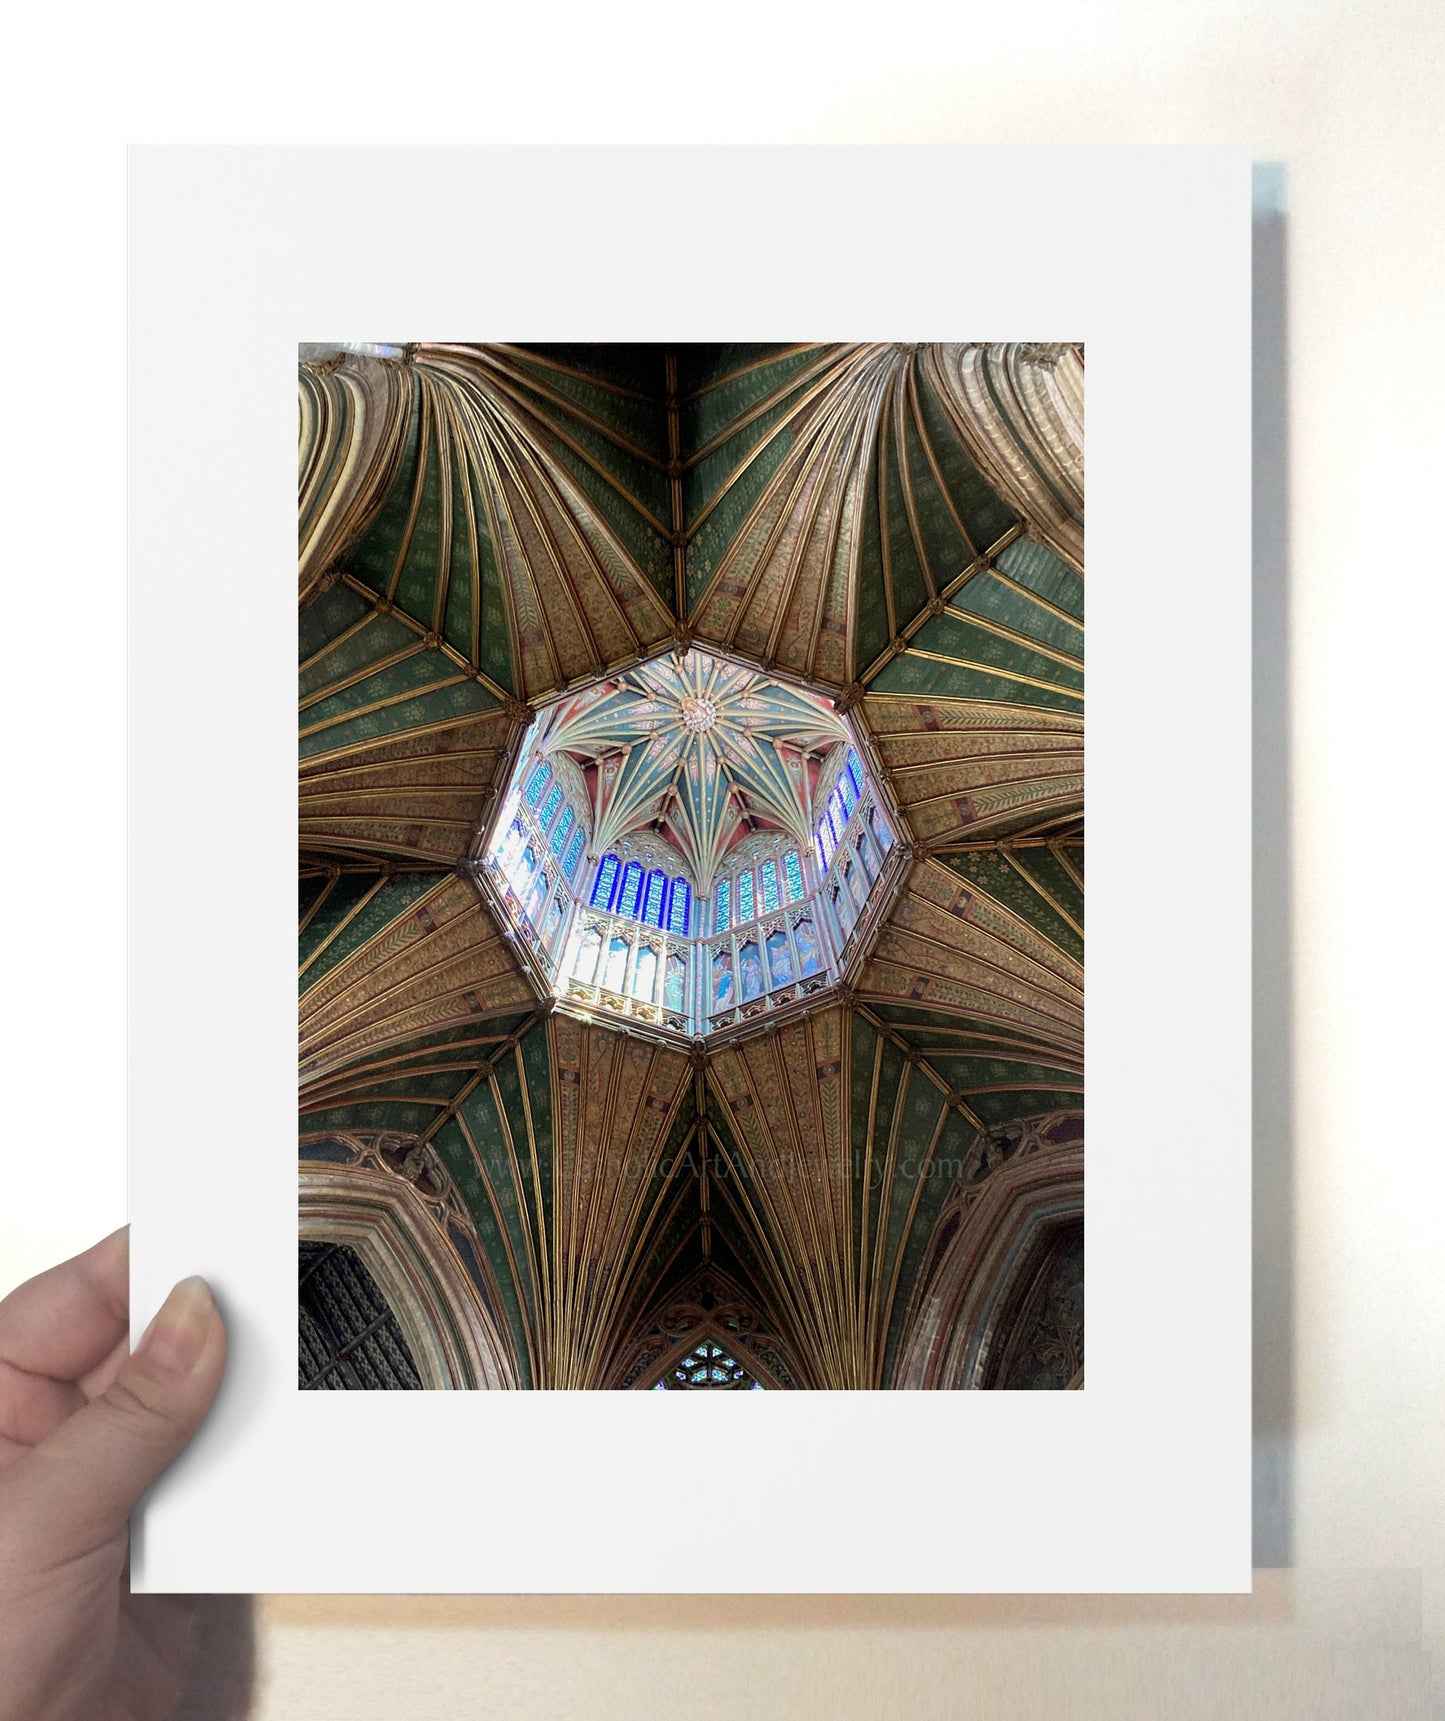 Ely Cathedral Ceiling – Medieval Architecture from a Benedictine Monastery – Catholic Art Print – Catholic Gift – Gift for Priest